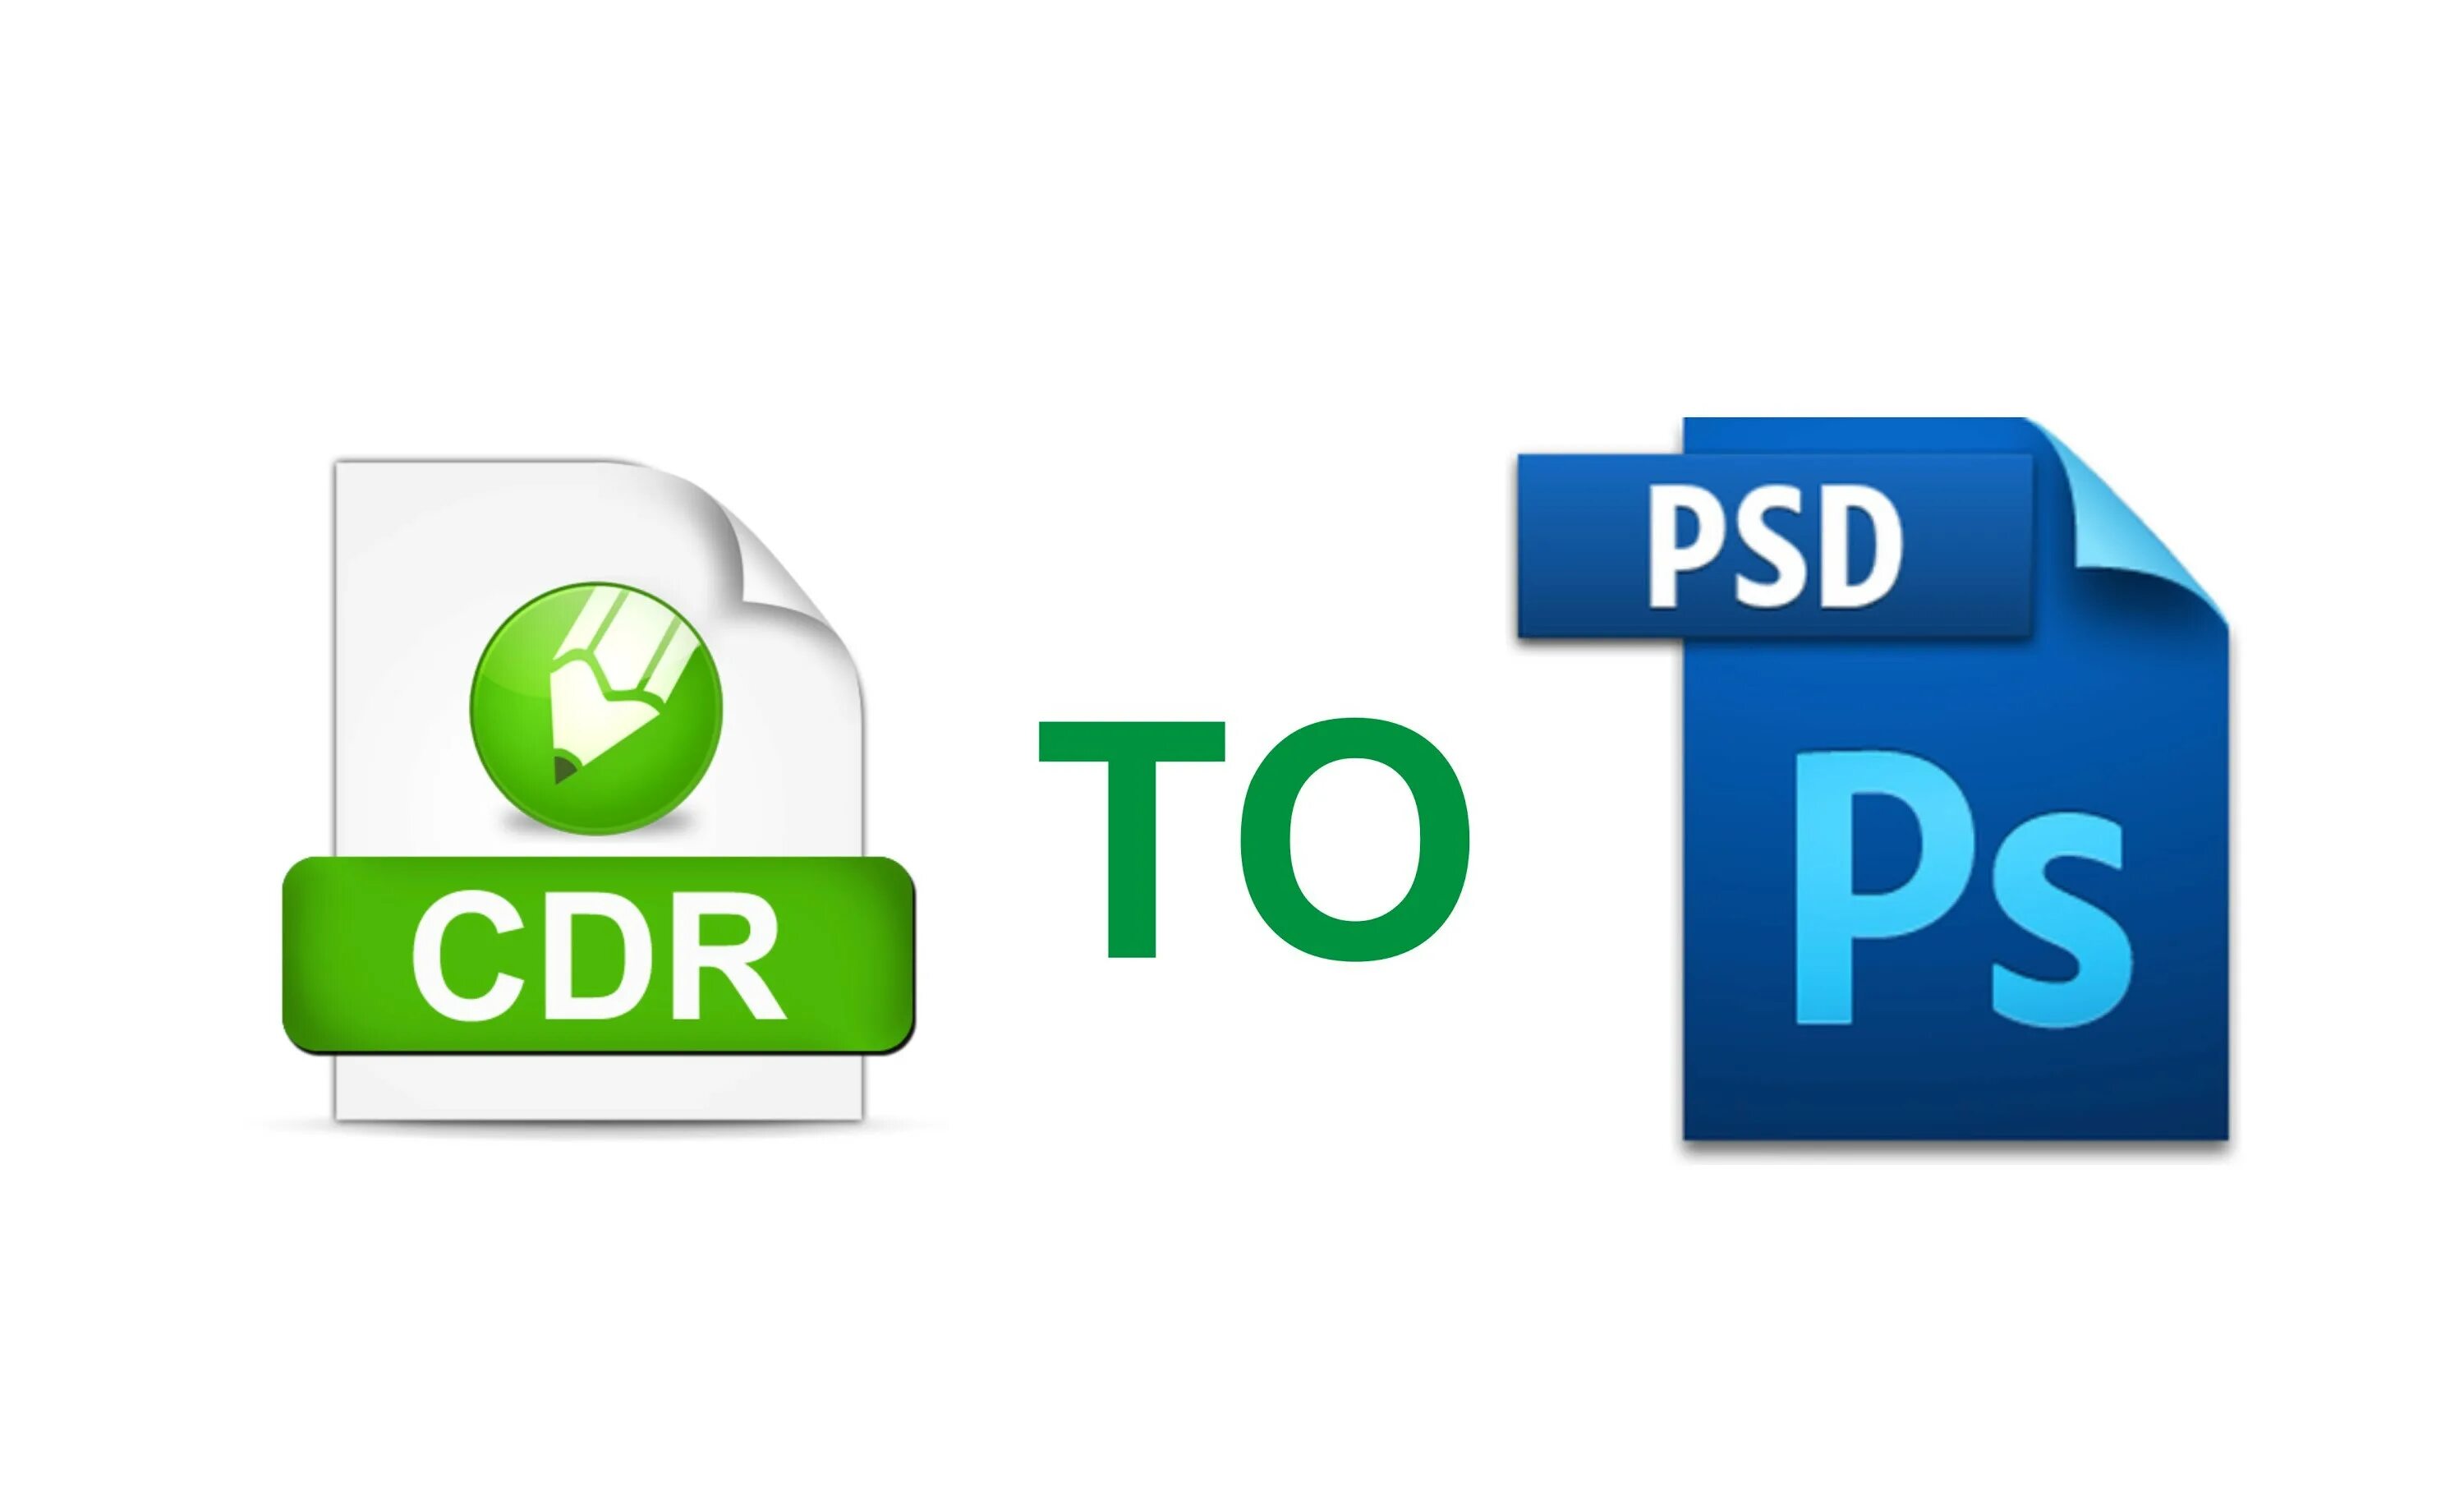 Cdr to png. Cdr Формат. Cdr (Формат файла). PSD Формат. Расширение cdr.